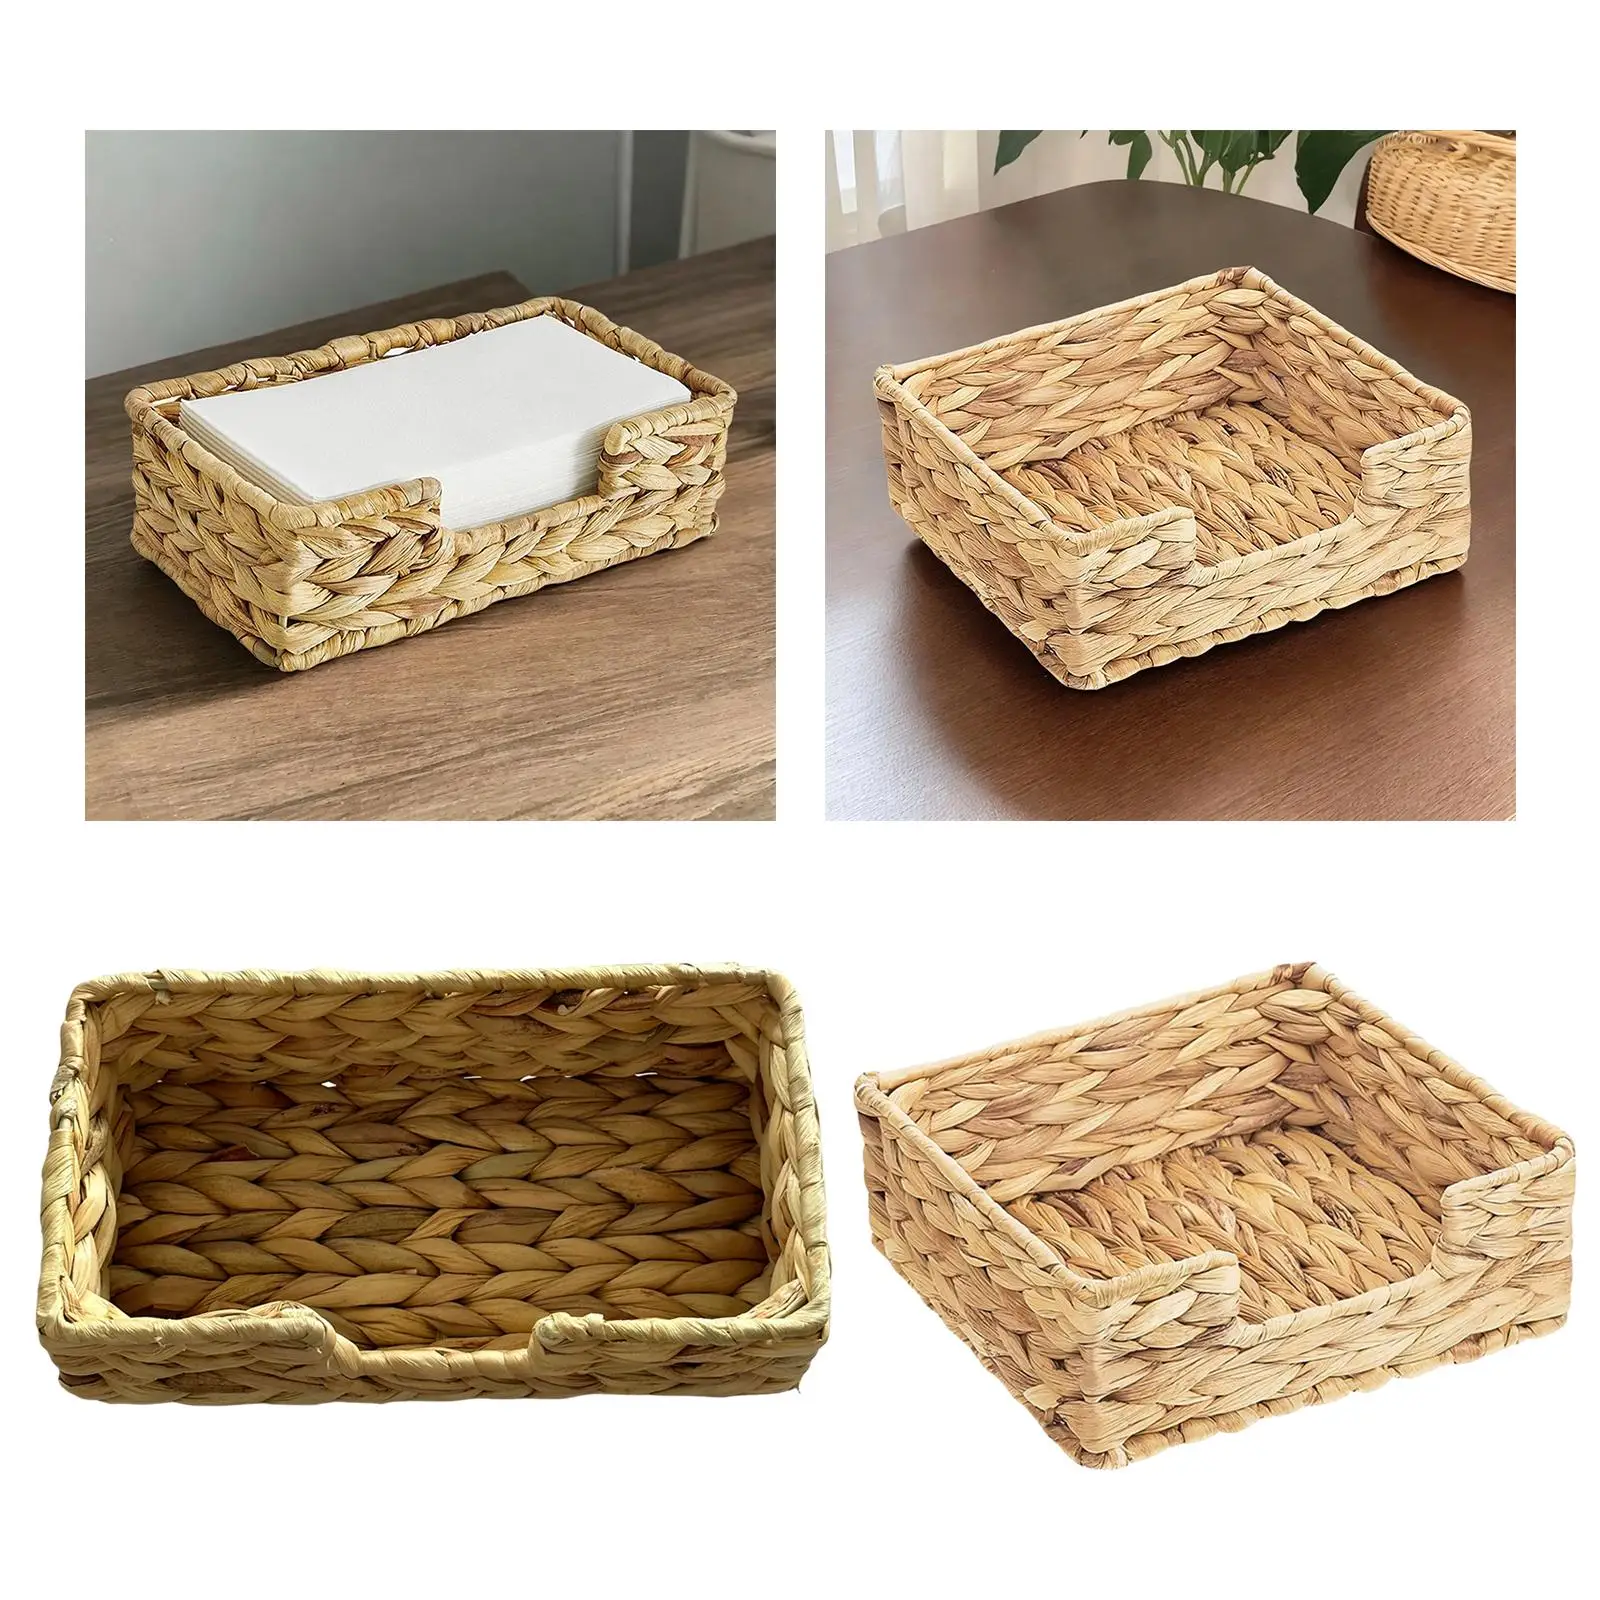 Woven Baskets Rattan Woven Organizer Snacks Serving Tray Container Organizer for Desk Shelves Bedroom Hotel Home Decoration